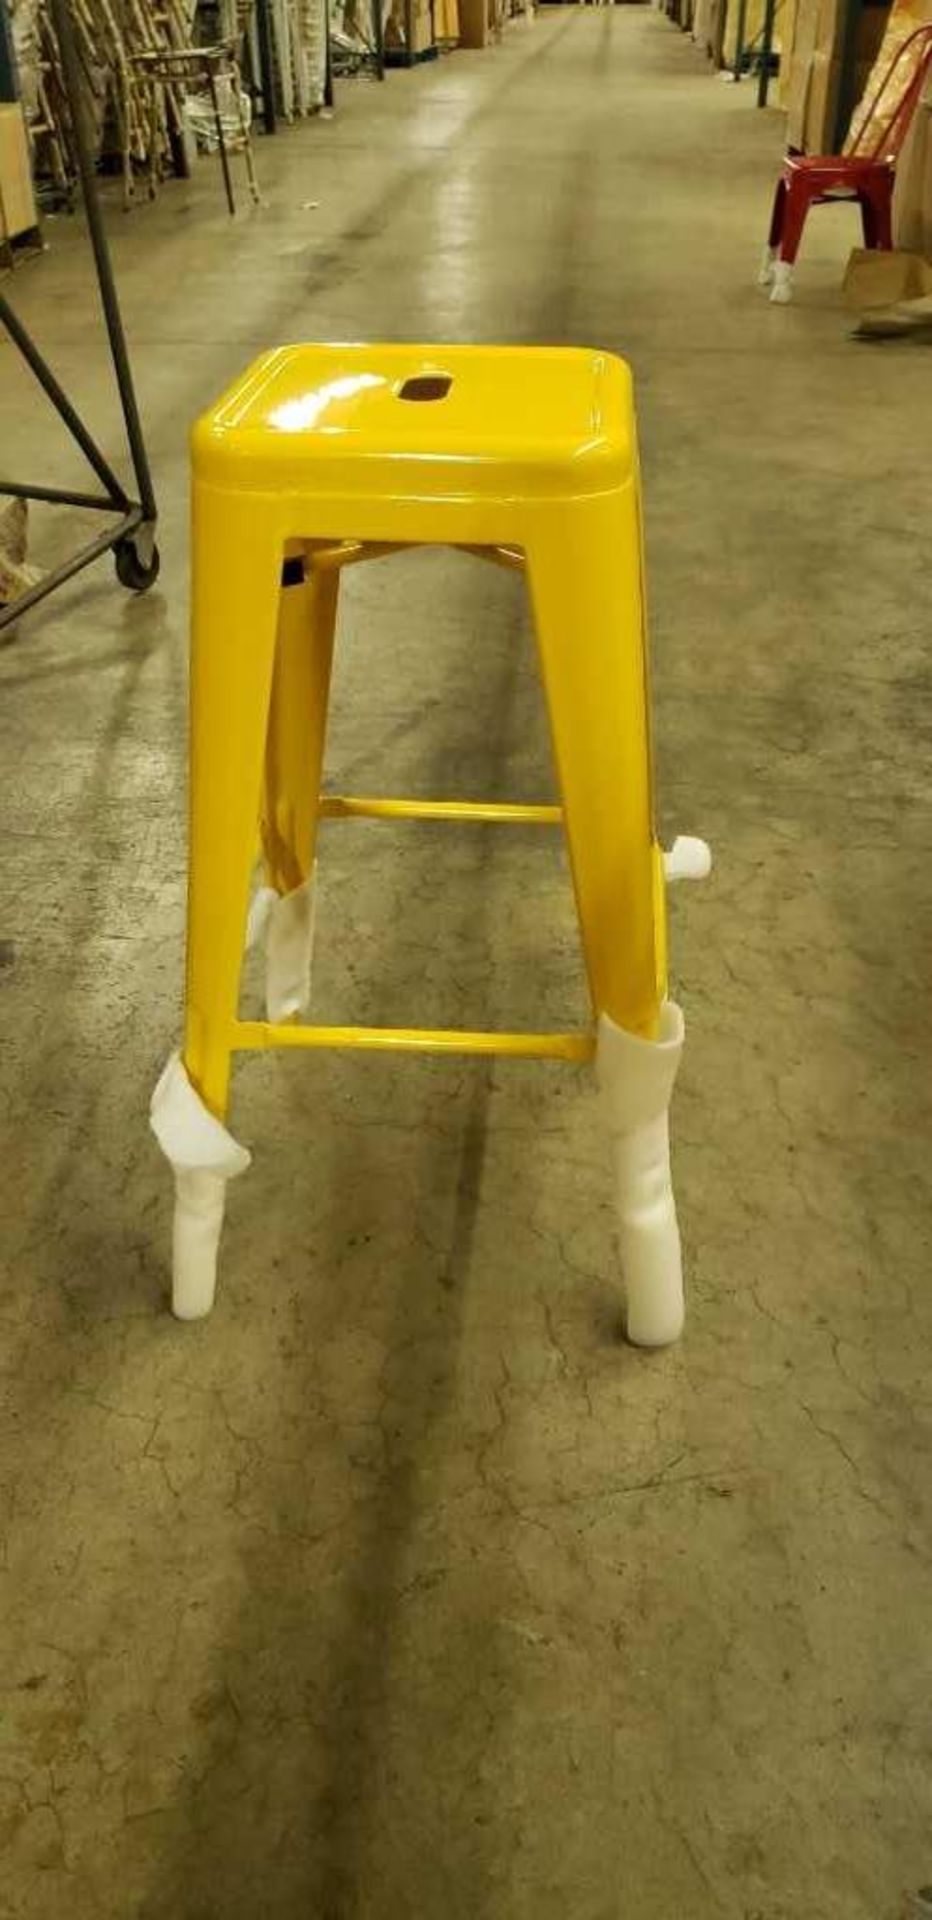 Manhattan Bar stool without back- Yellow, T-5046Y, 9 boxes with 4 each, 36 total - Image 2 of 4